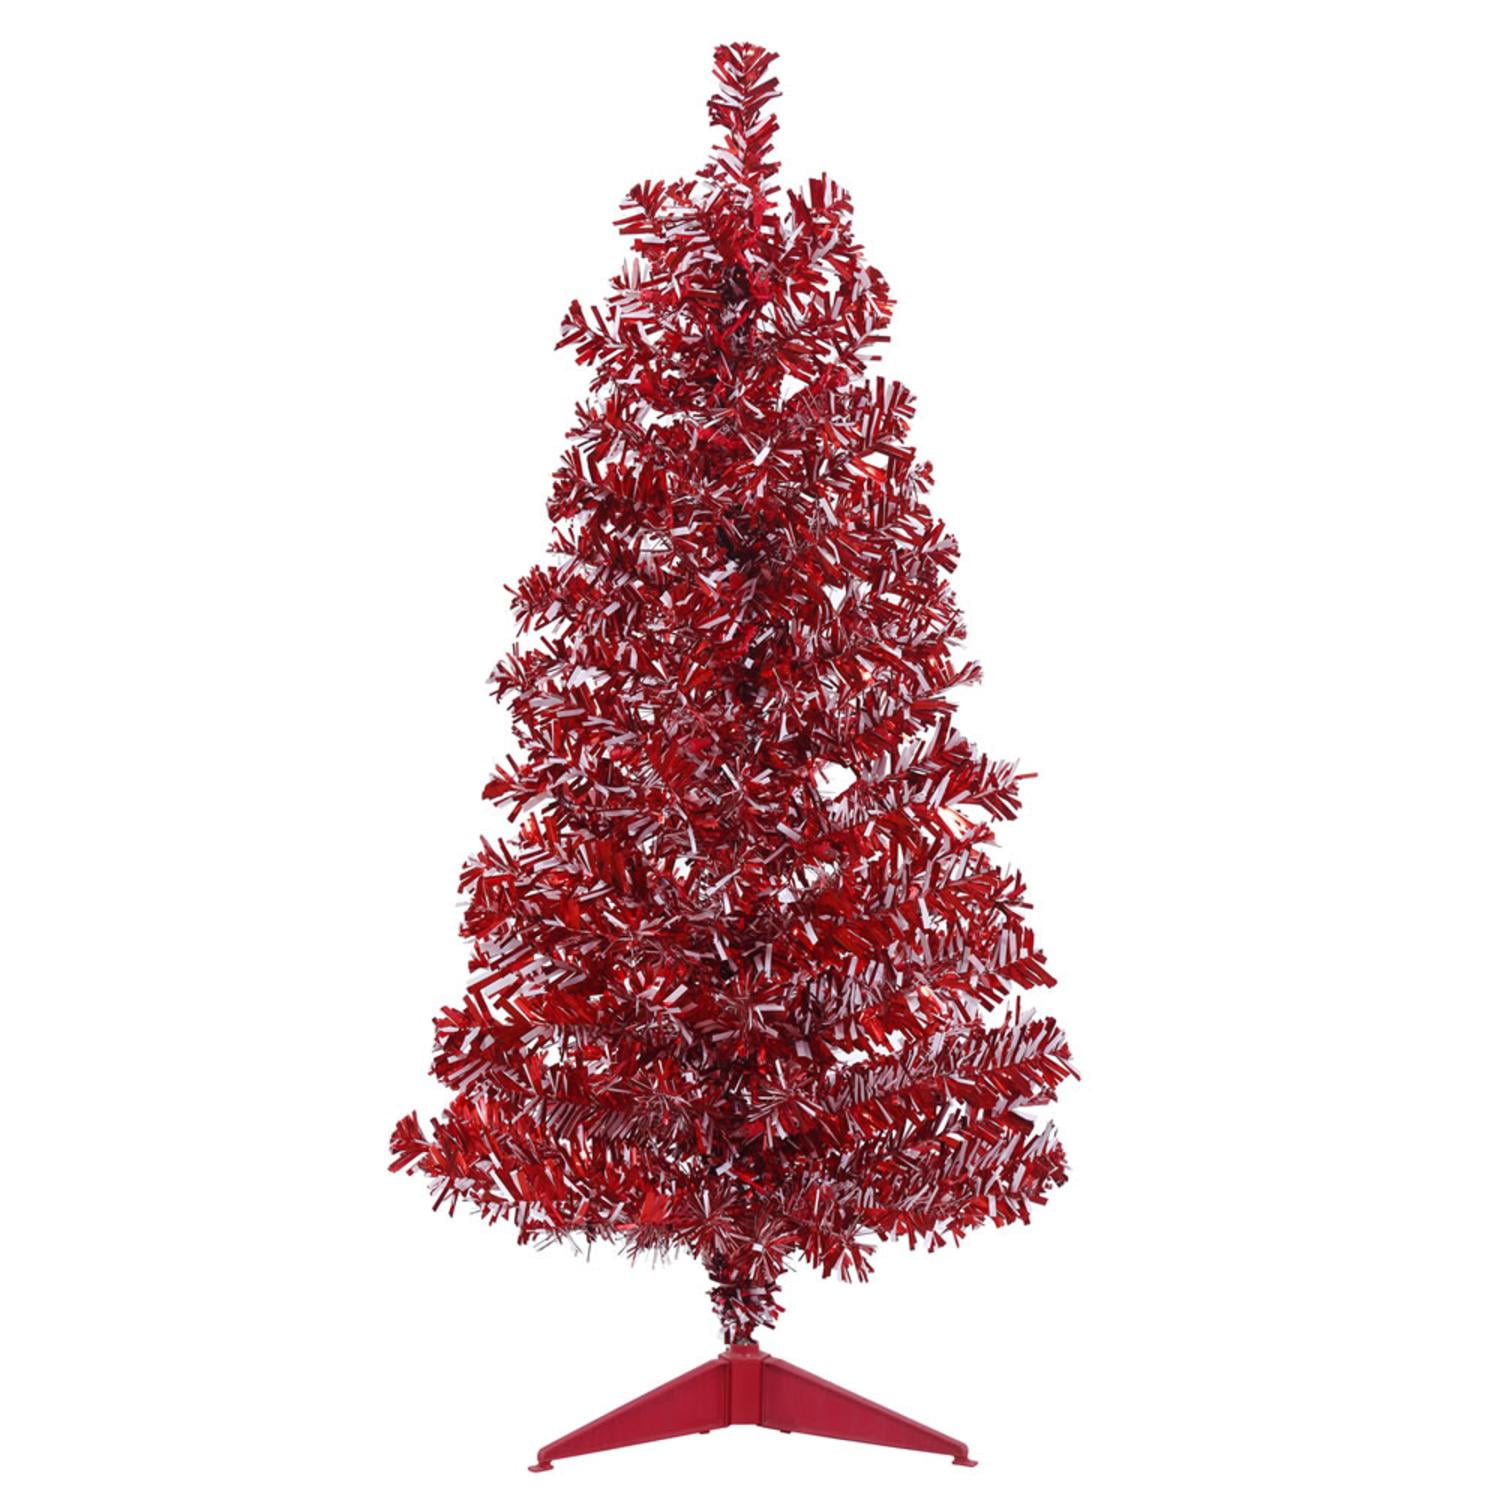 Top 104+ Images red and white candy cane christmas tree Updated